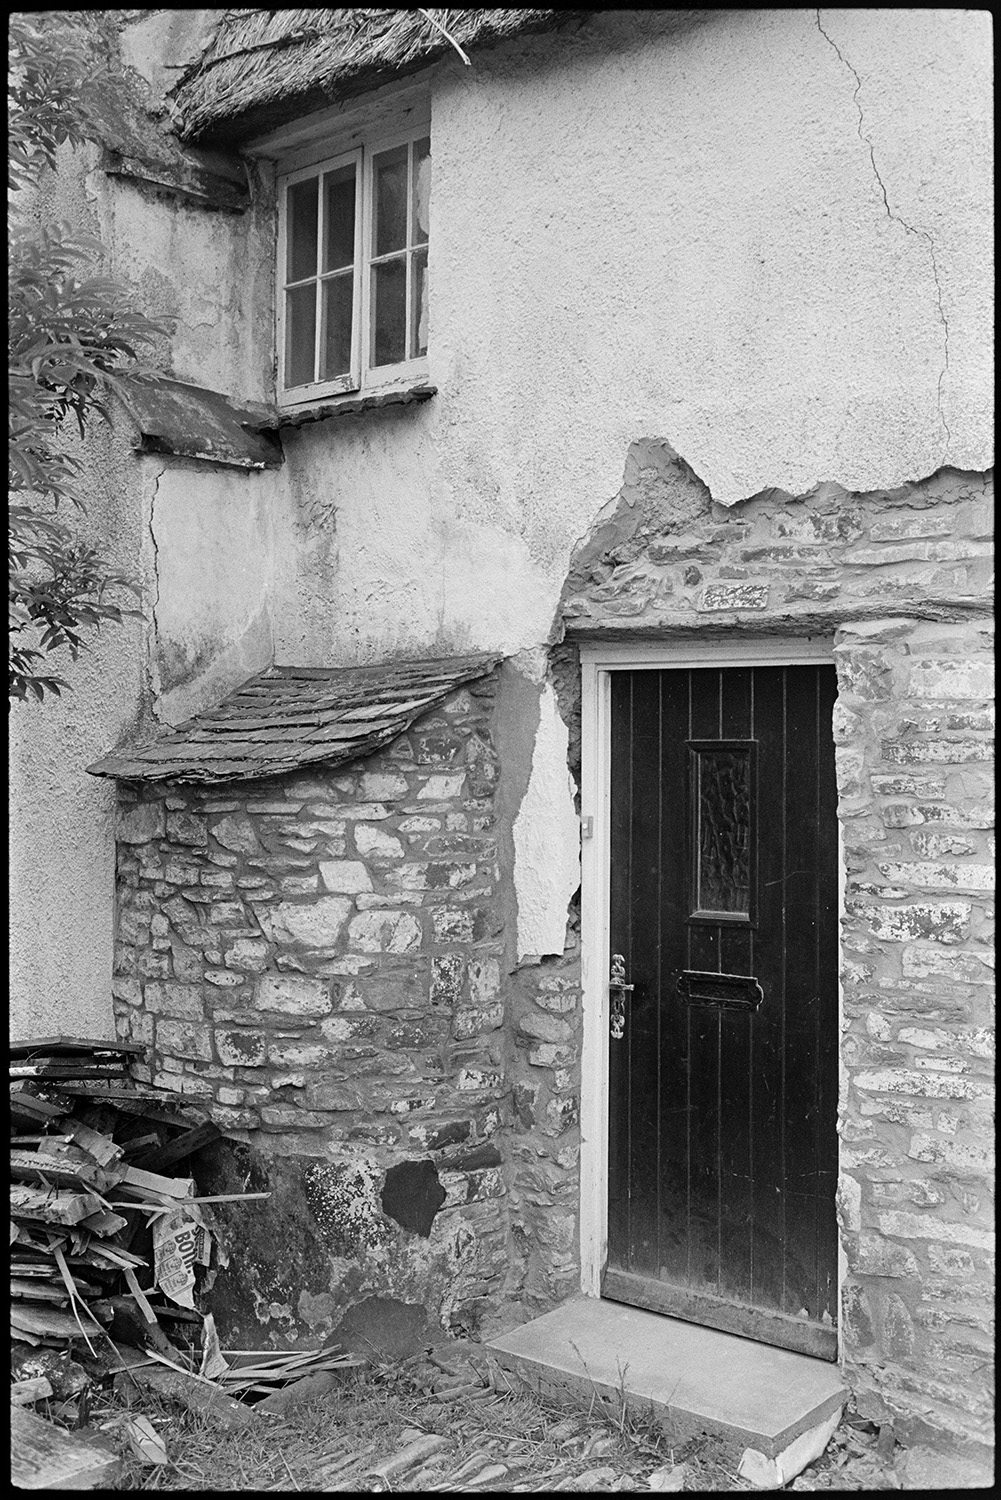 Back door of cottage with old bread oven, being renovated and ruined, see RAV/01/1603/17 for earlier image.
[The back door of a thatched cottage at Beaford during renovation. There is stonework being repointed on the exterior of a bread oven and around the door.]